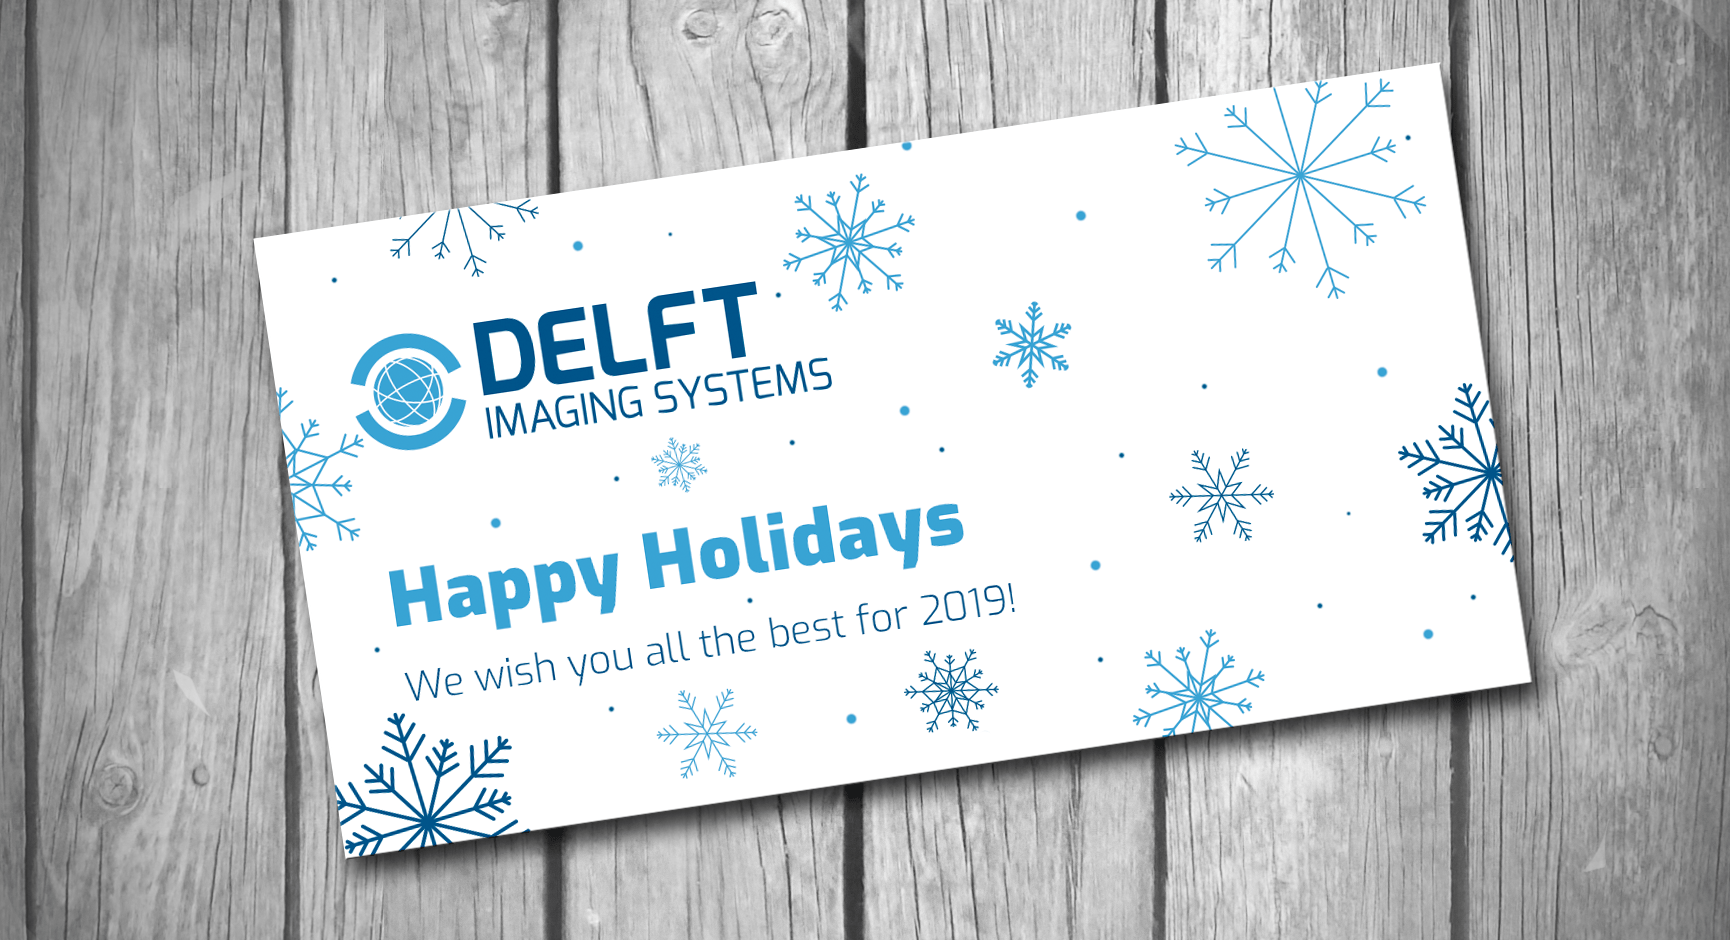 Delft Imaging Systems holiday wishes